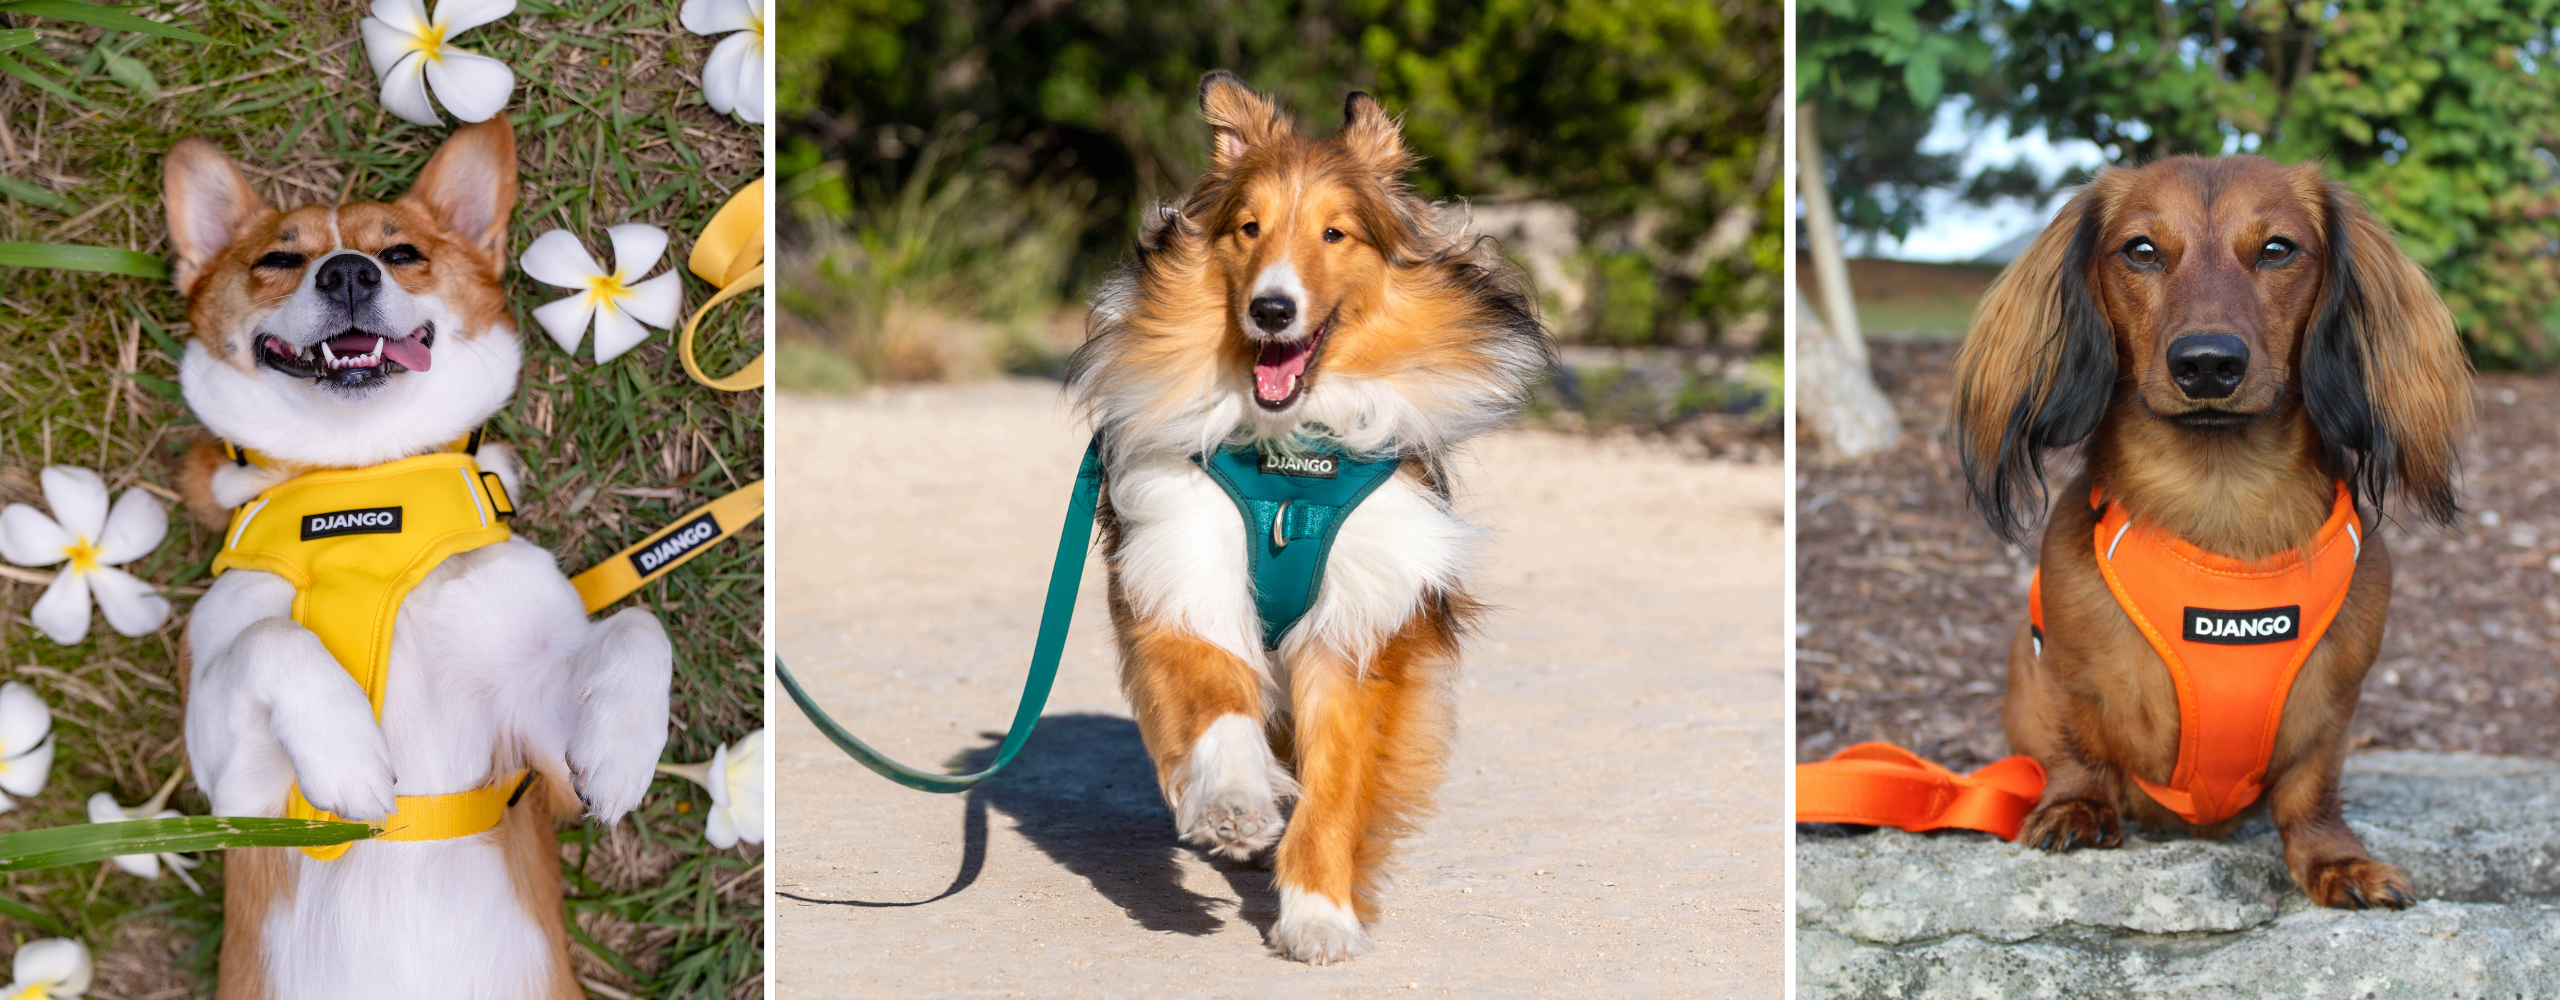 DJANGO’s&nbsp;dog harnesses are&nbsp;comfortable, durable, stylish, and designed for outdoor adventures and everyday wear.&nbsp;